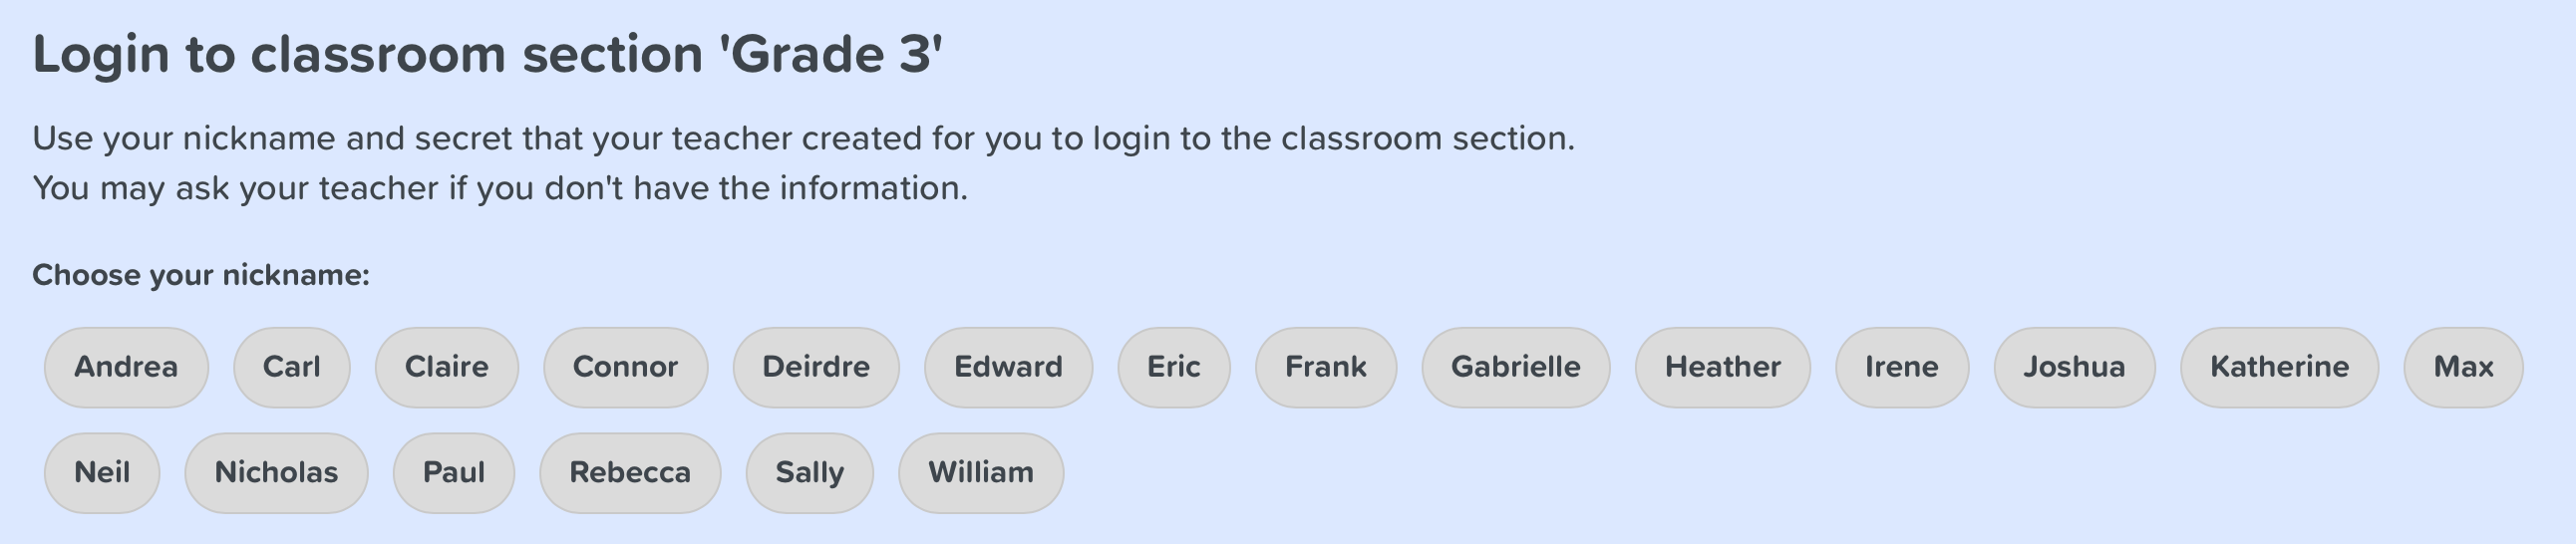 Classroom section login page